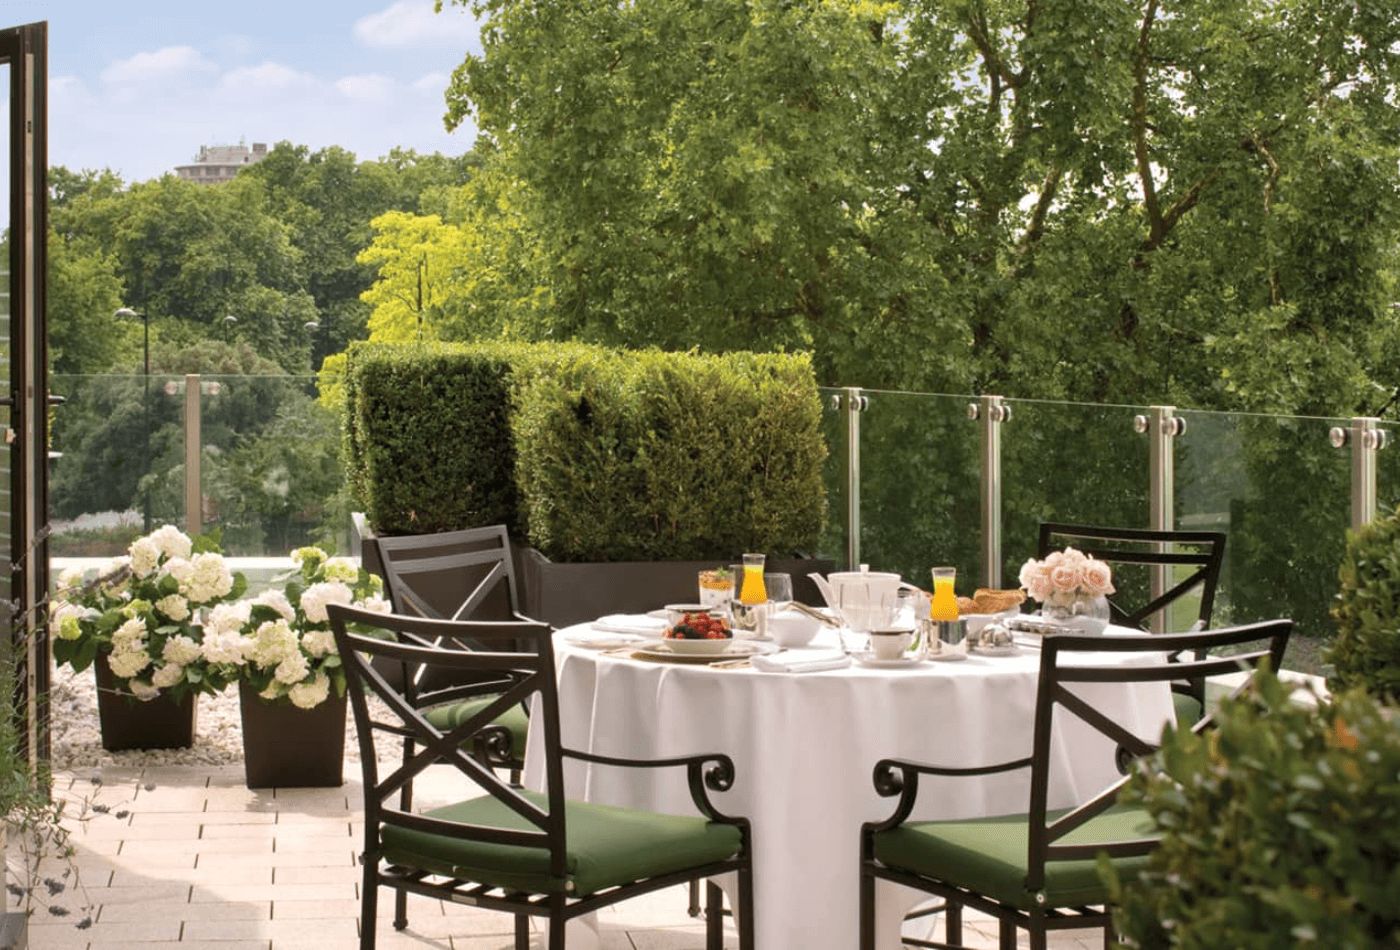 Four Seasons garden with black metal chairs, green cushions and white roses